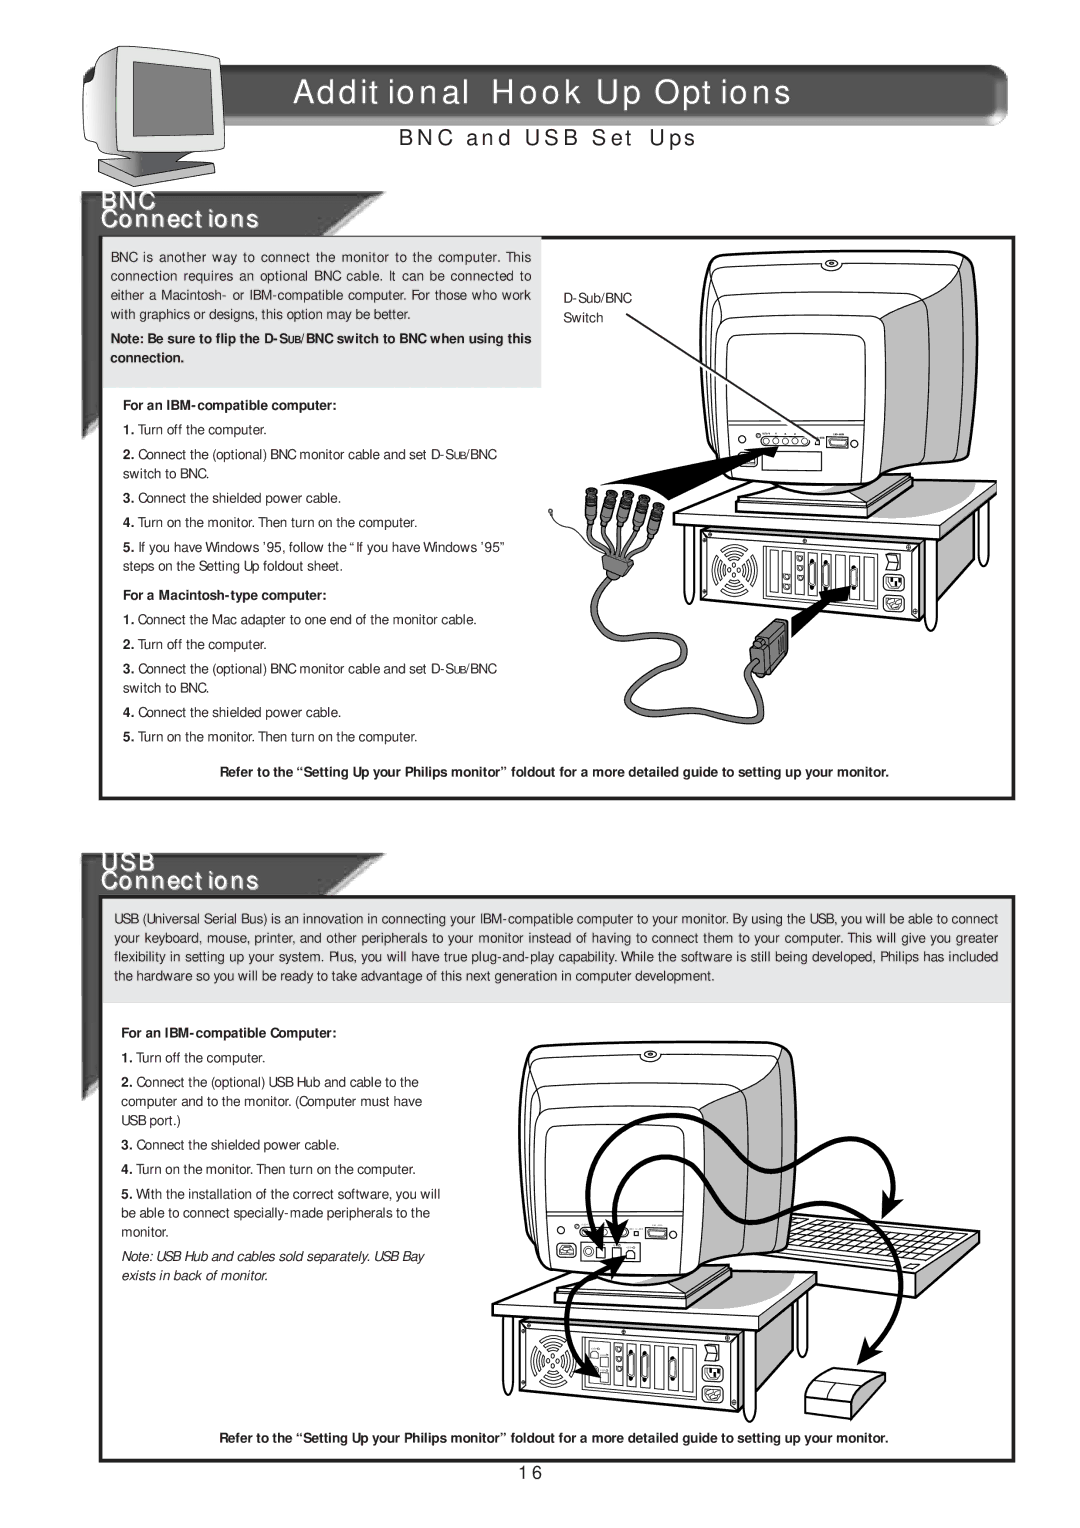 Philips 21B582BH Additional Hook Up Options, Connections, For an IBM-compatible computer, For a Macintosh-type computer 